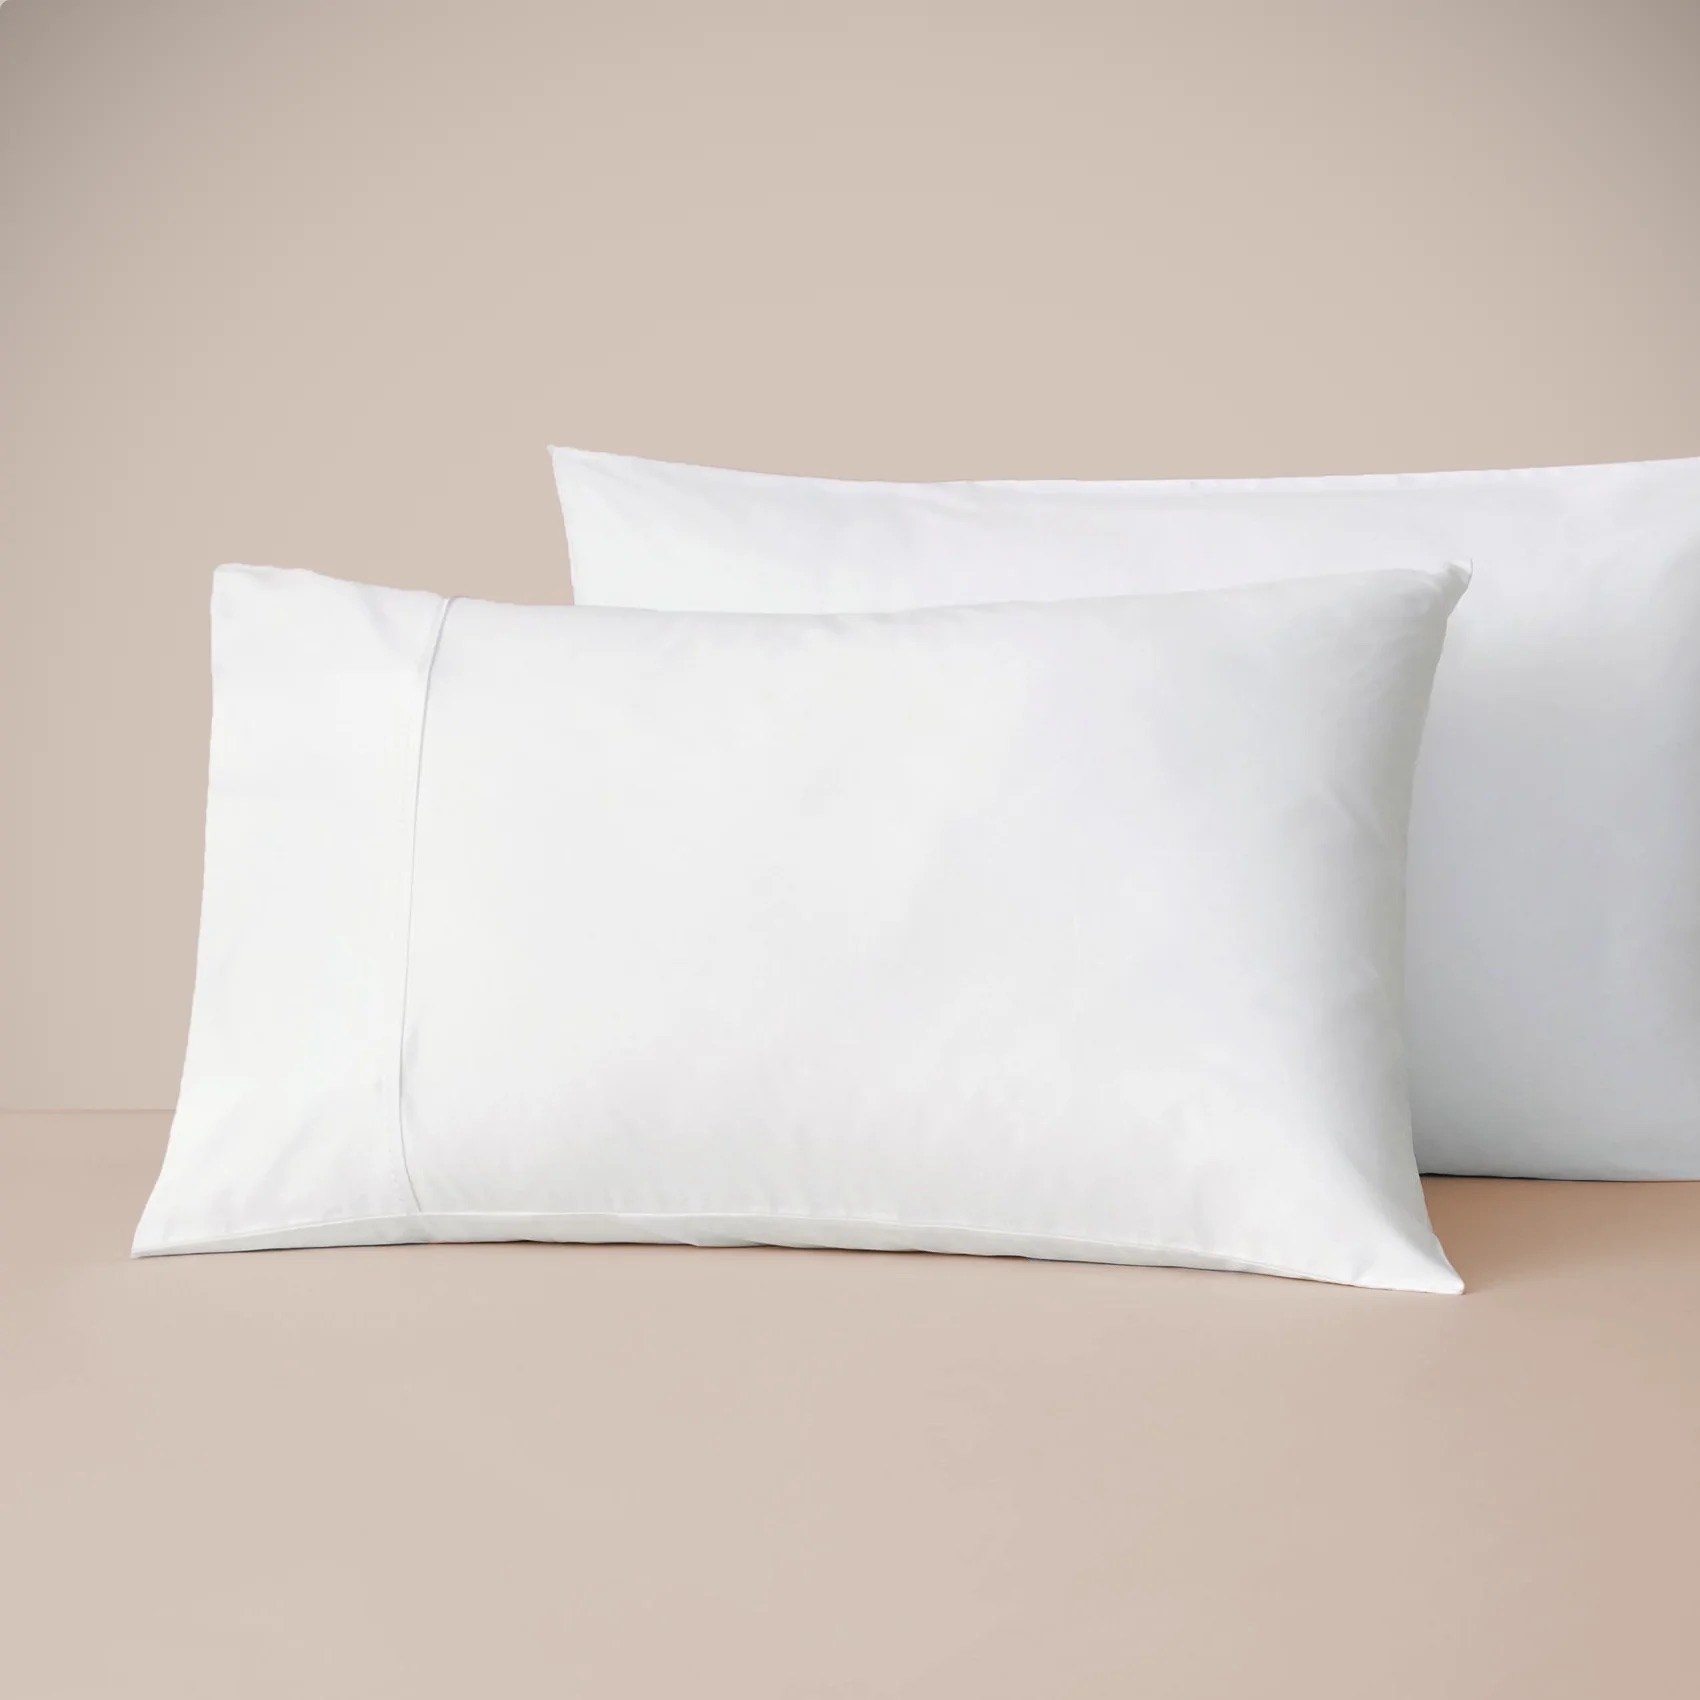 Two pillow cases with white silk pillow cases